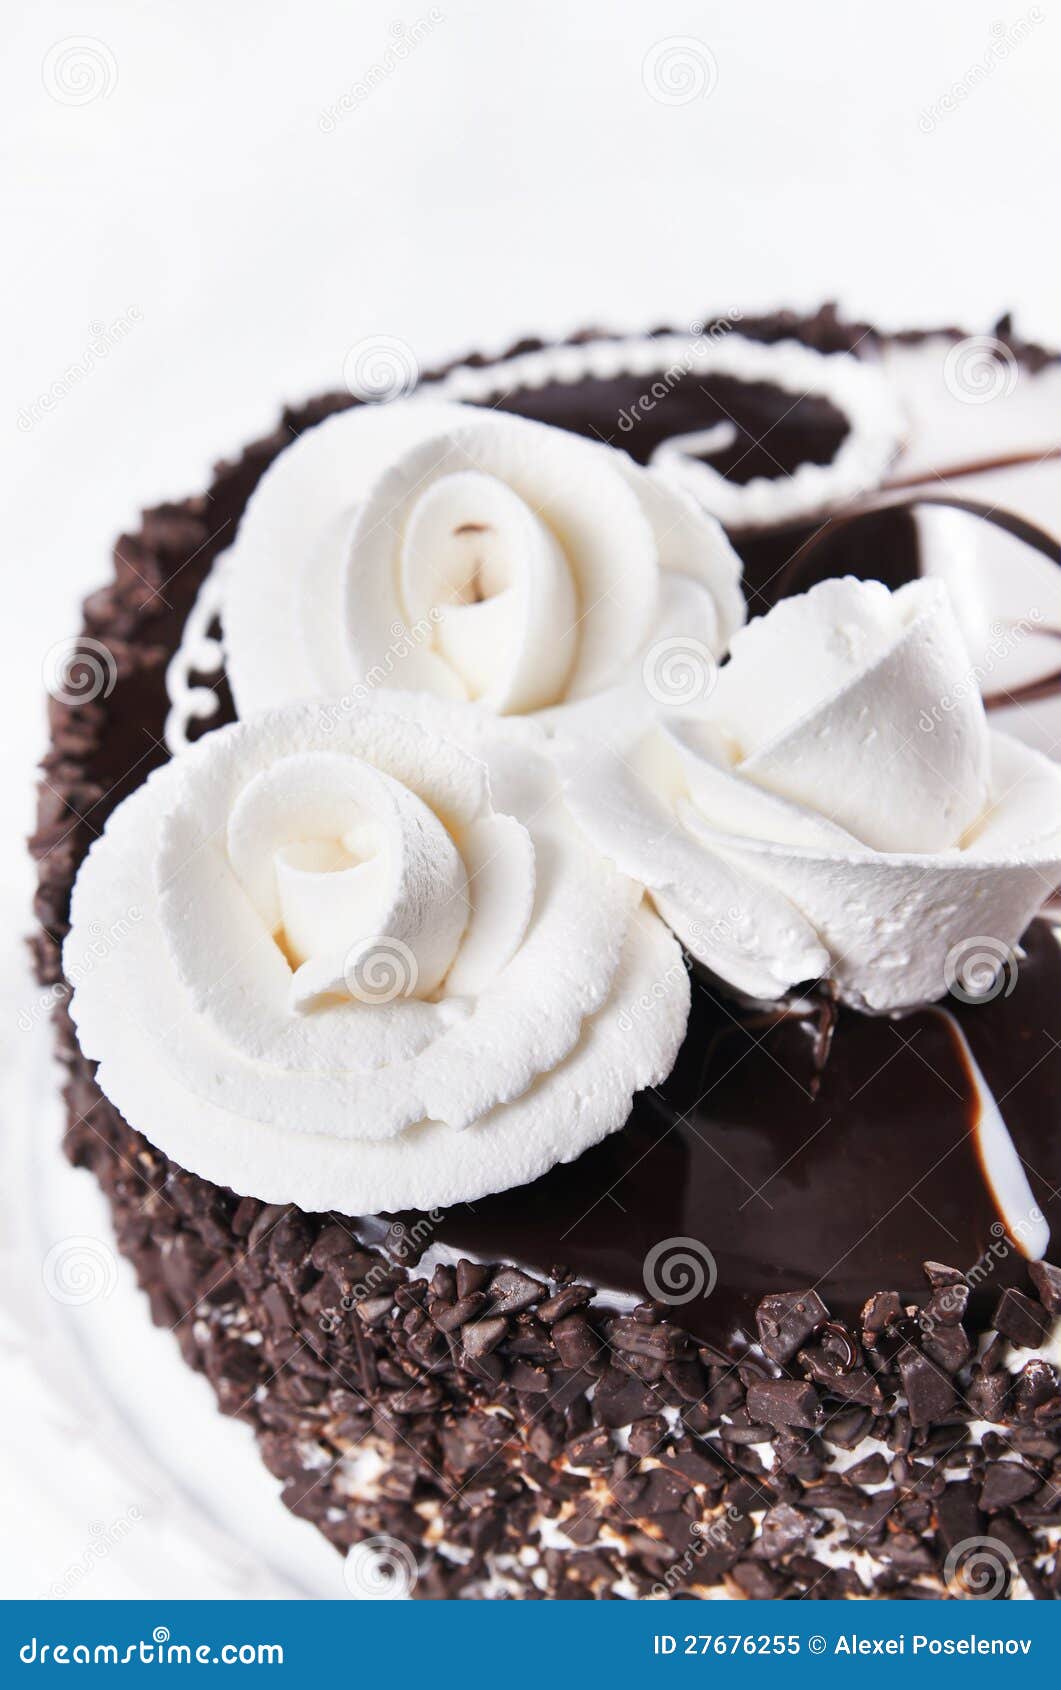 Day And Night Chocolate Cake With Decorative Roses Stock Image Image Of Nutrient Dessert